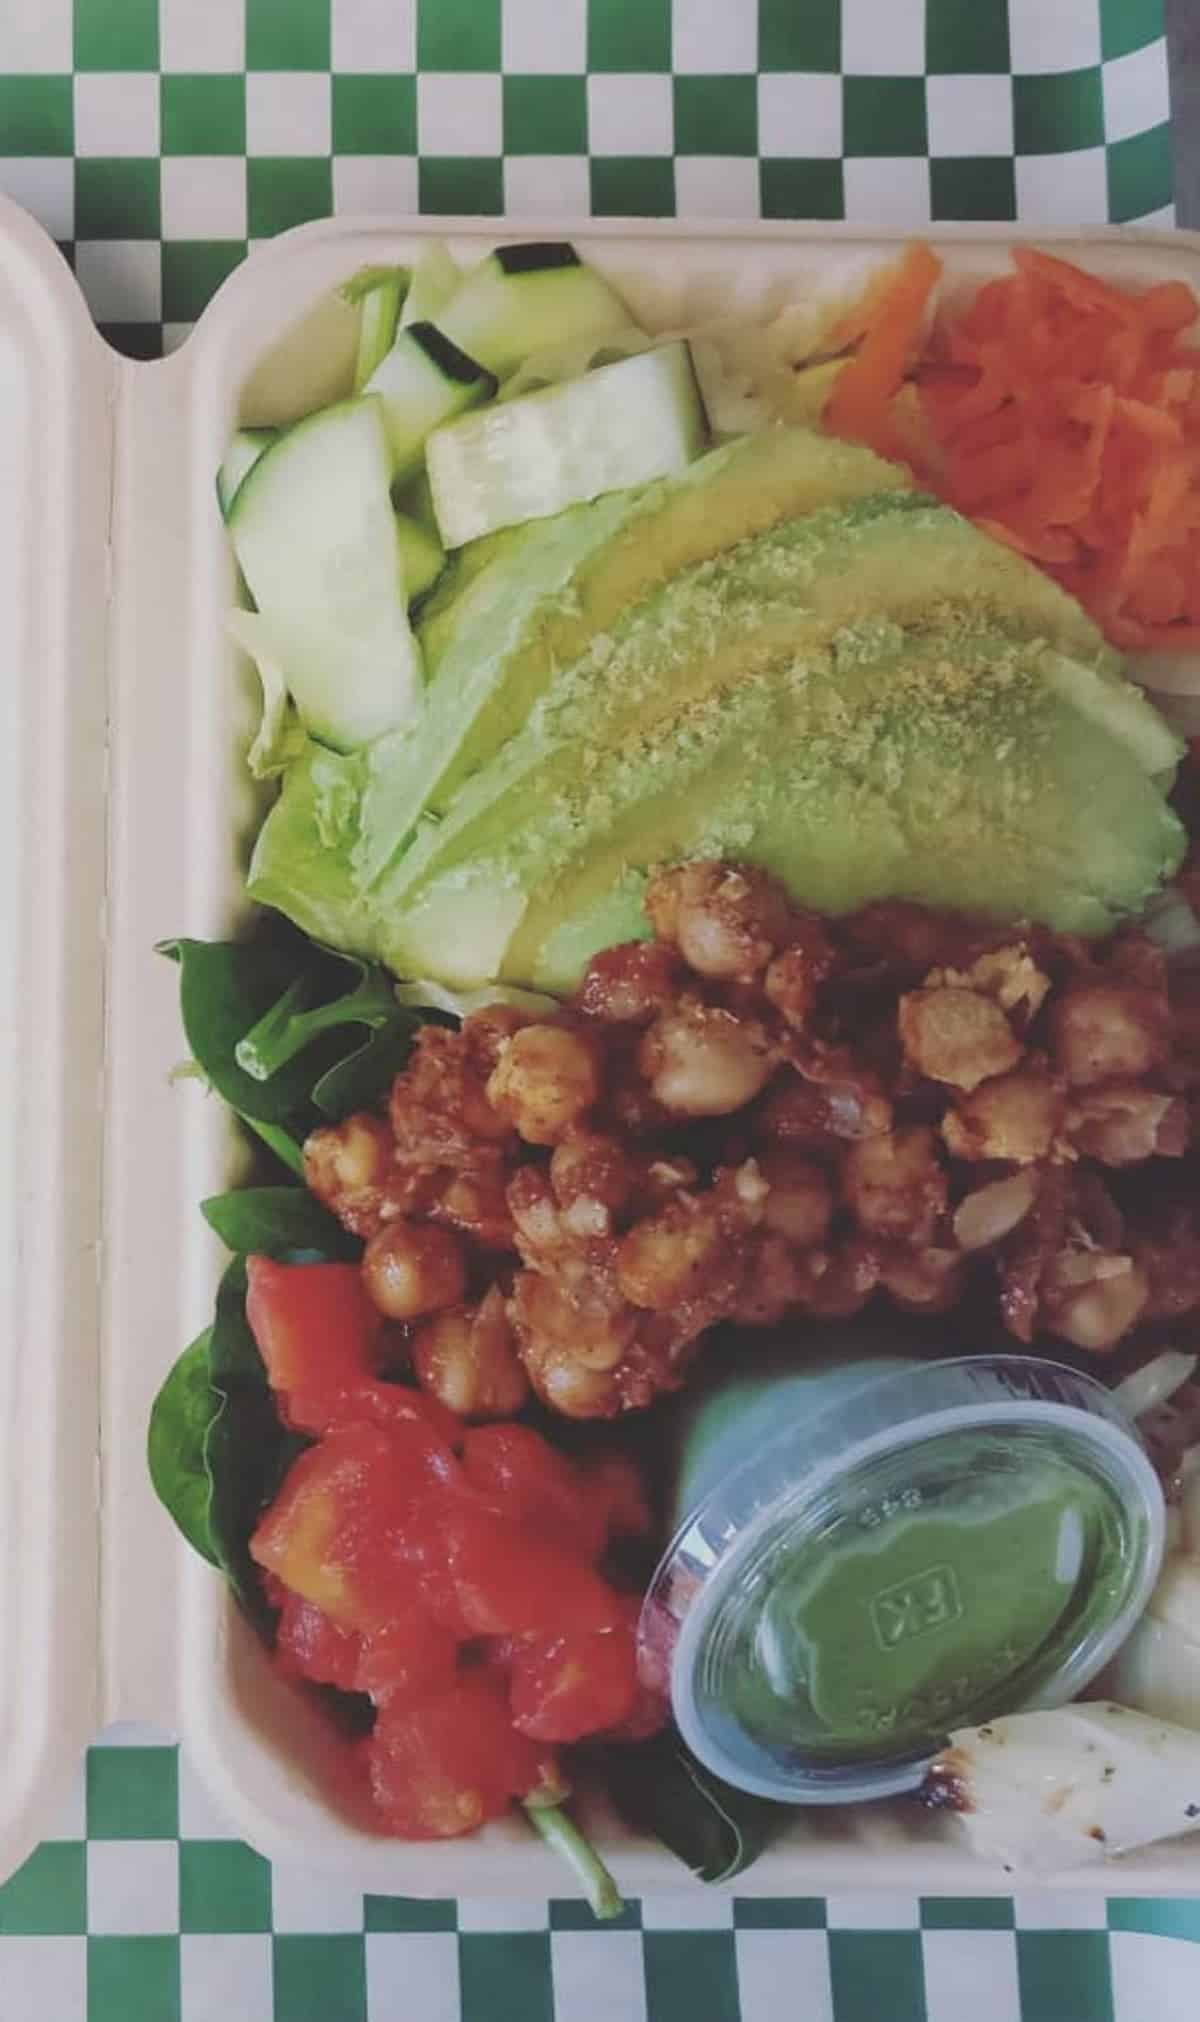 A house salad from Conscious Cravings vegan cuisine.